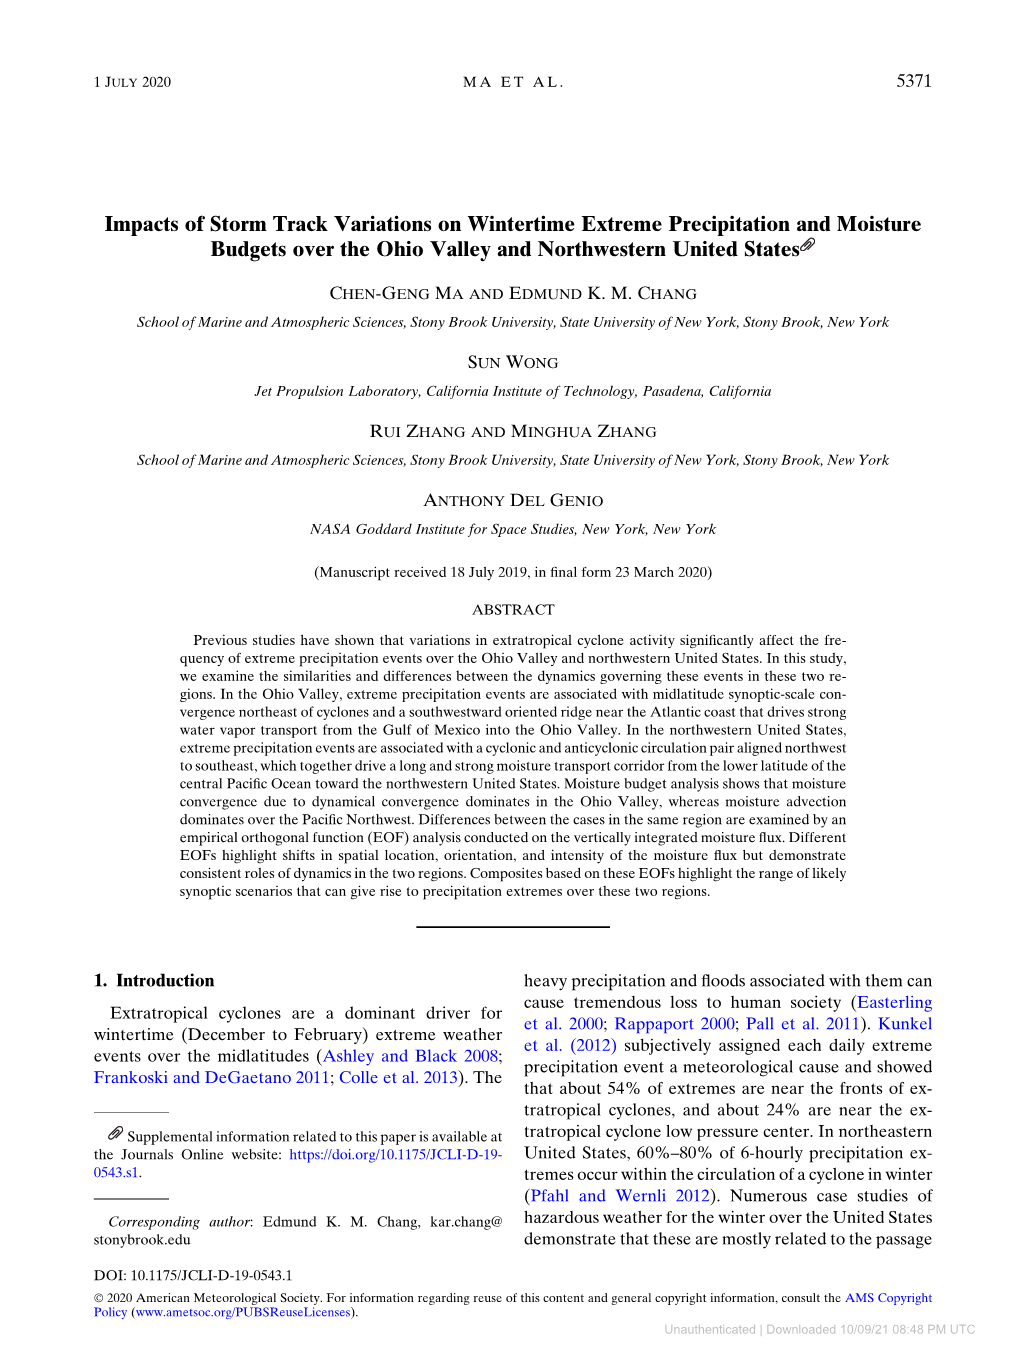 Impacts of Storm Track Variations on Wintertime Extreme Precipitation and Moisture Budgets Over the Ohio Valley and Northwestern United States